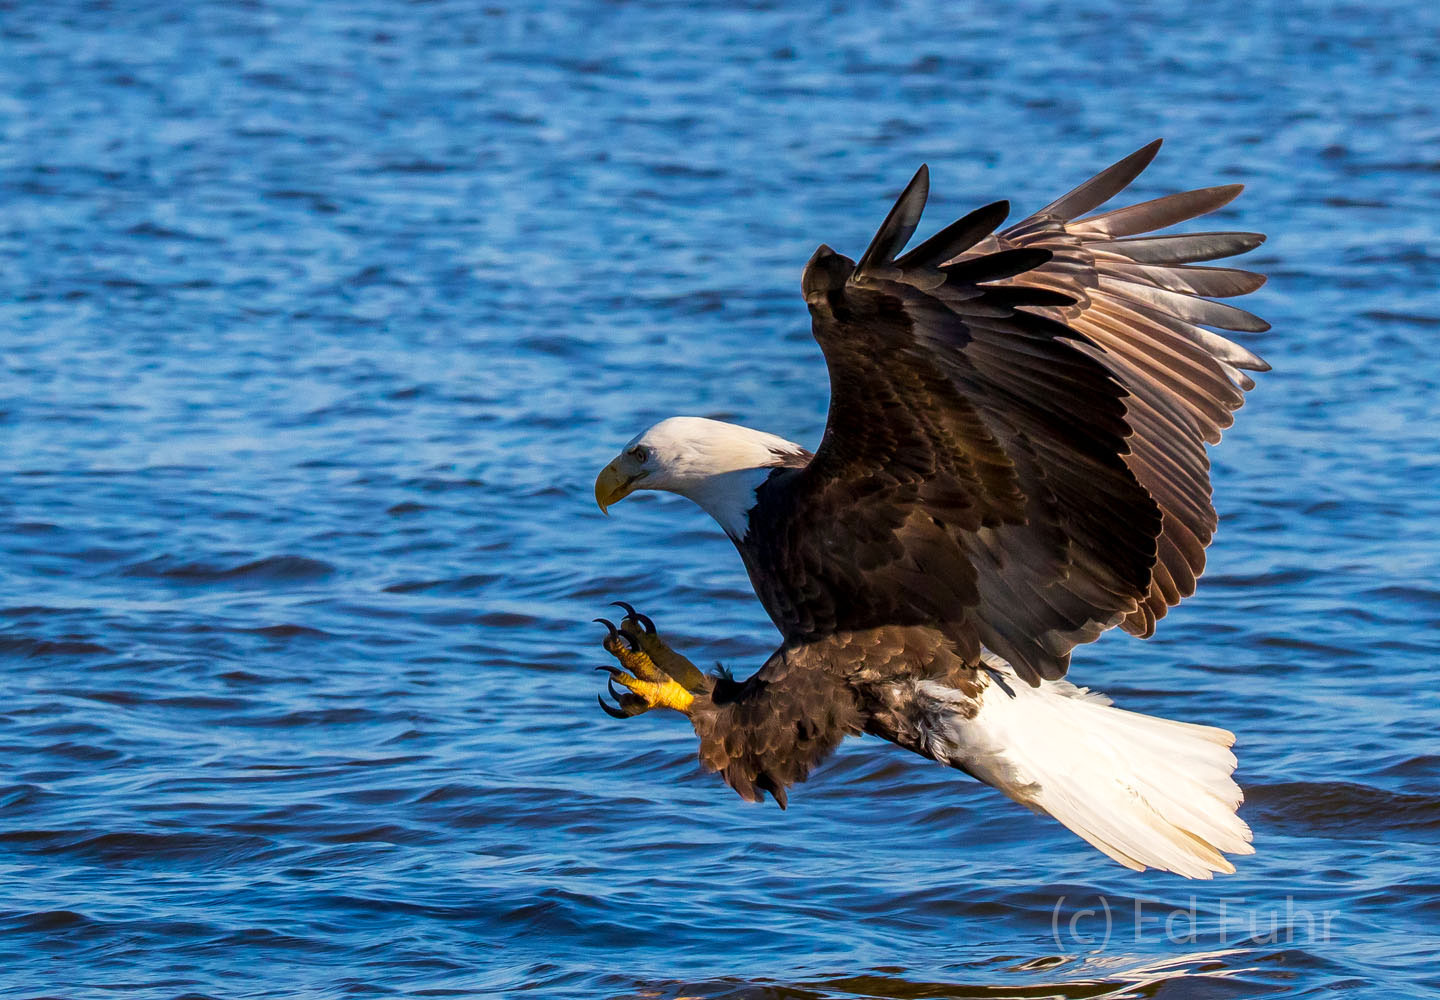 A bald eagle approaches an unsuspecting fish.